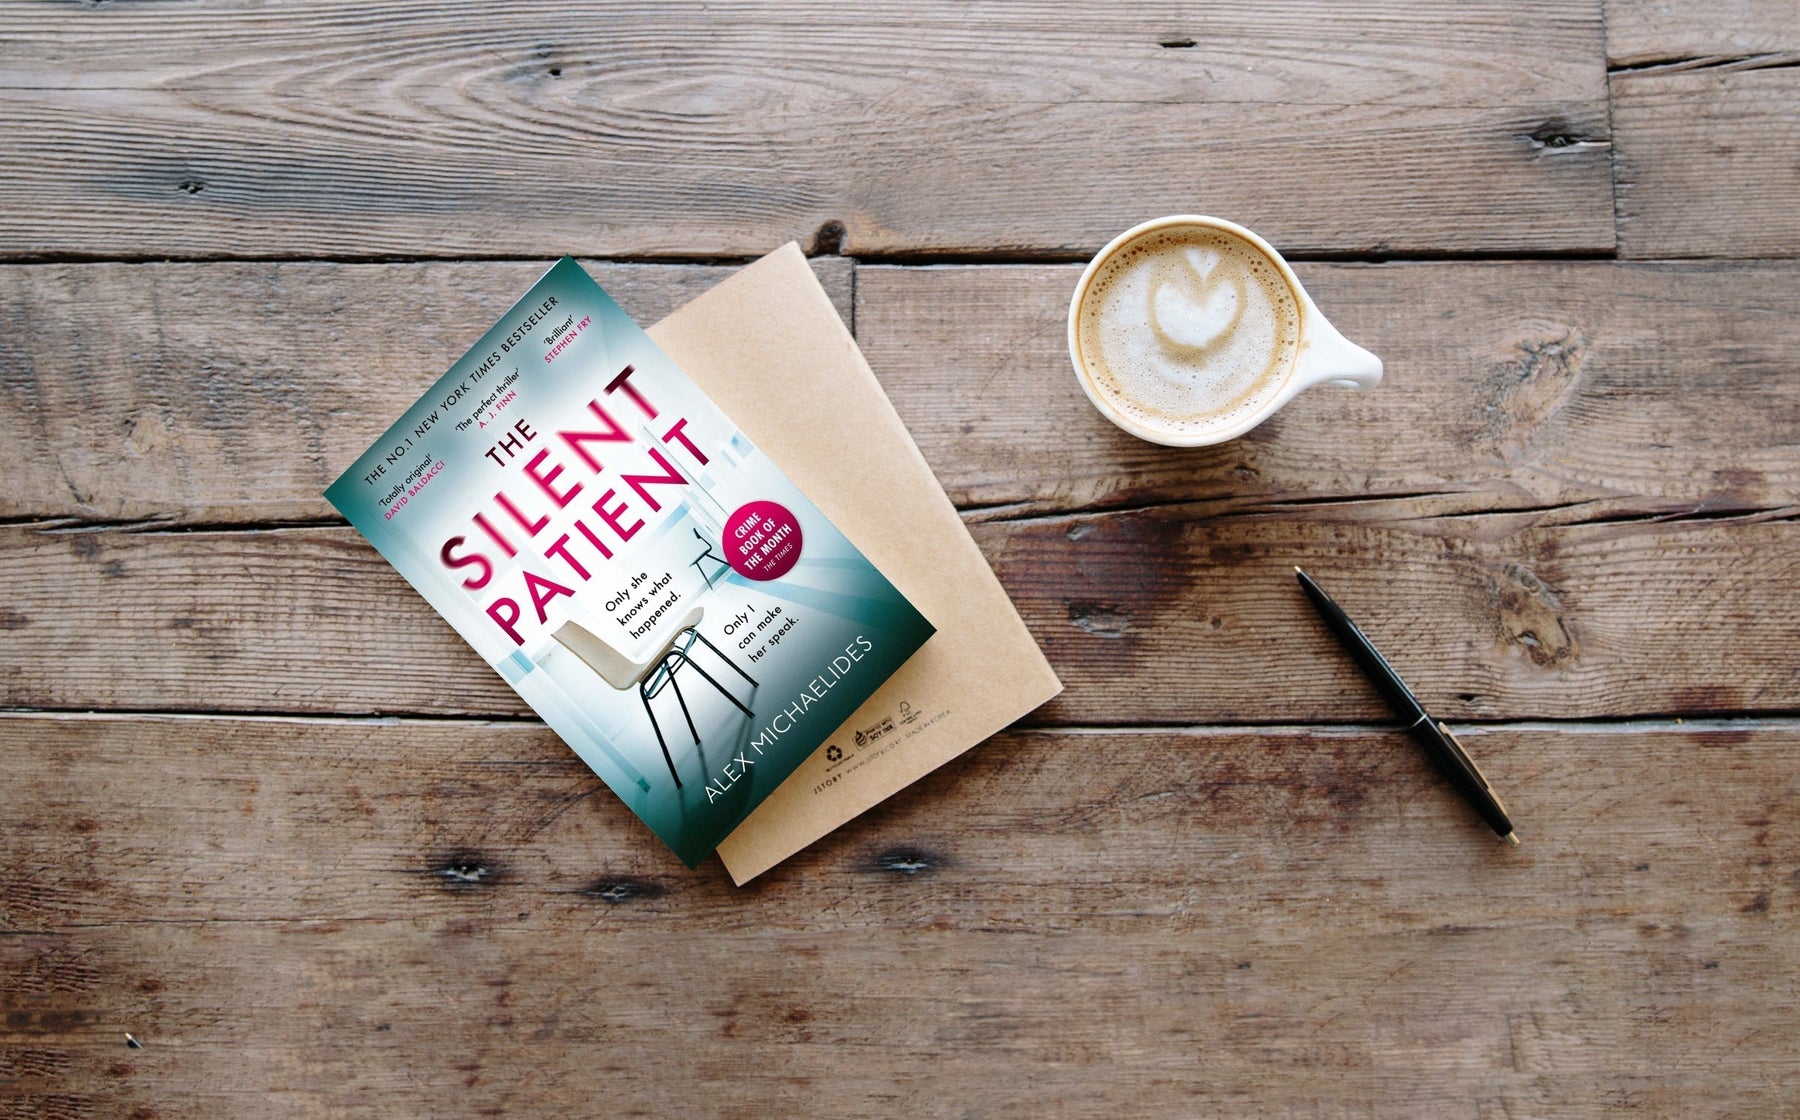 The Silent Patient by Alex Michaelides Online Book Store – Bookends